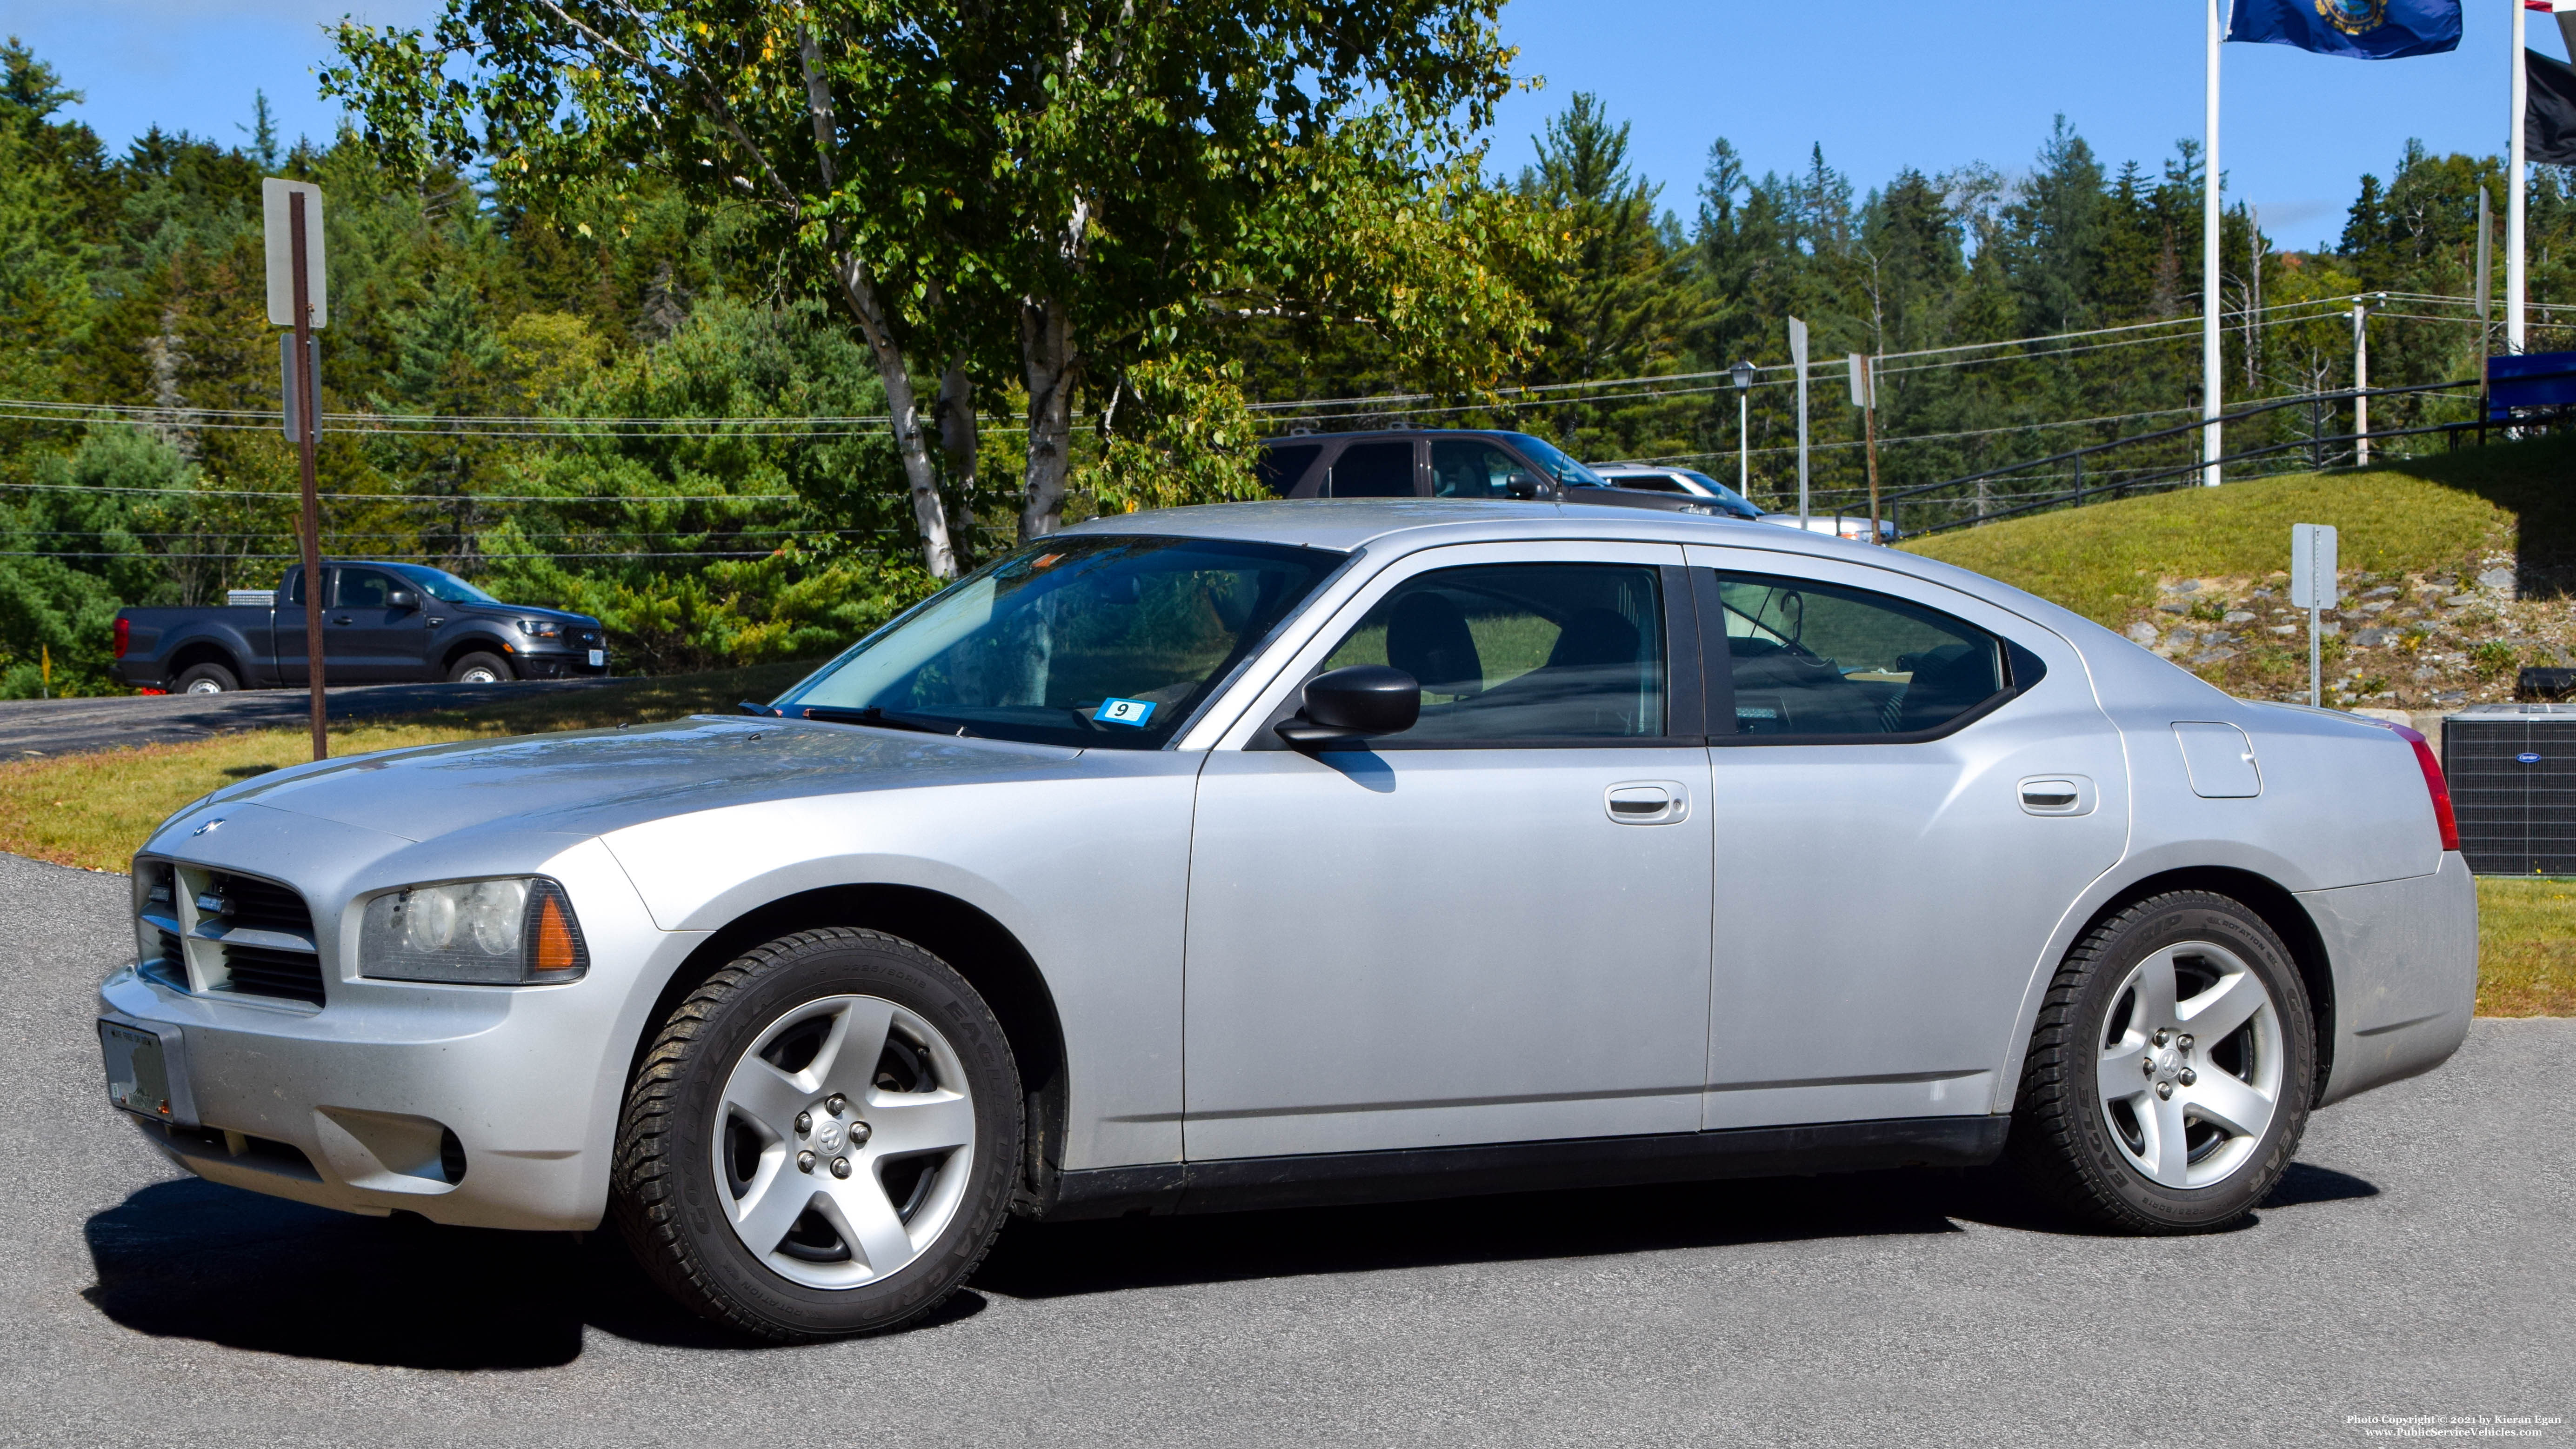 A photo  of New Hampshire State Police
            Cruiser 653, a 2006-2010 Dodge Charger             taken by Kieran Egan